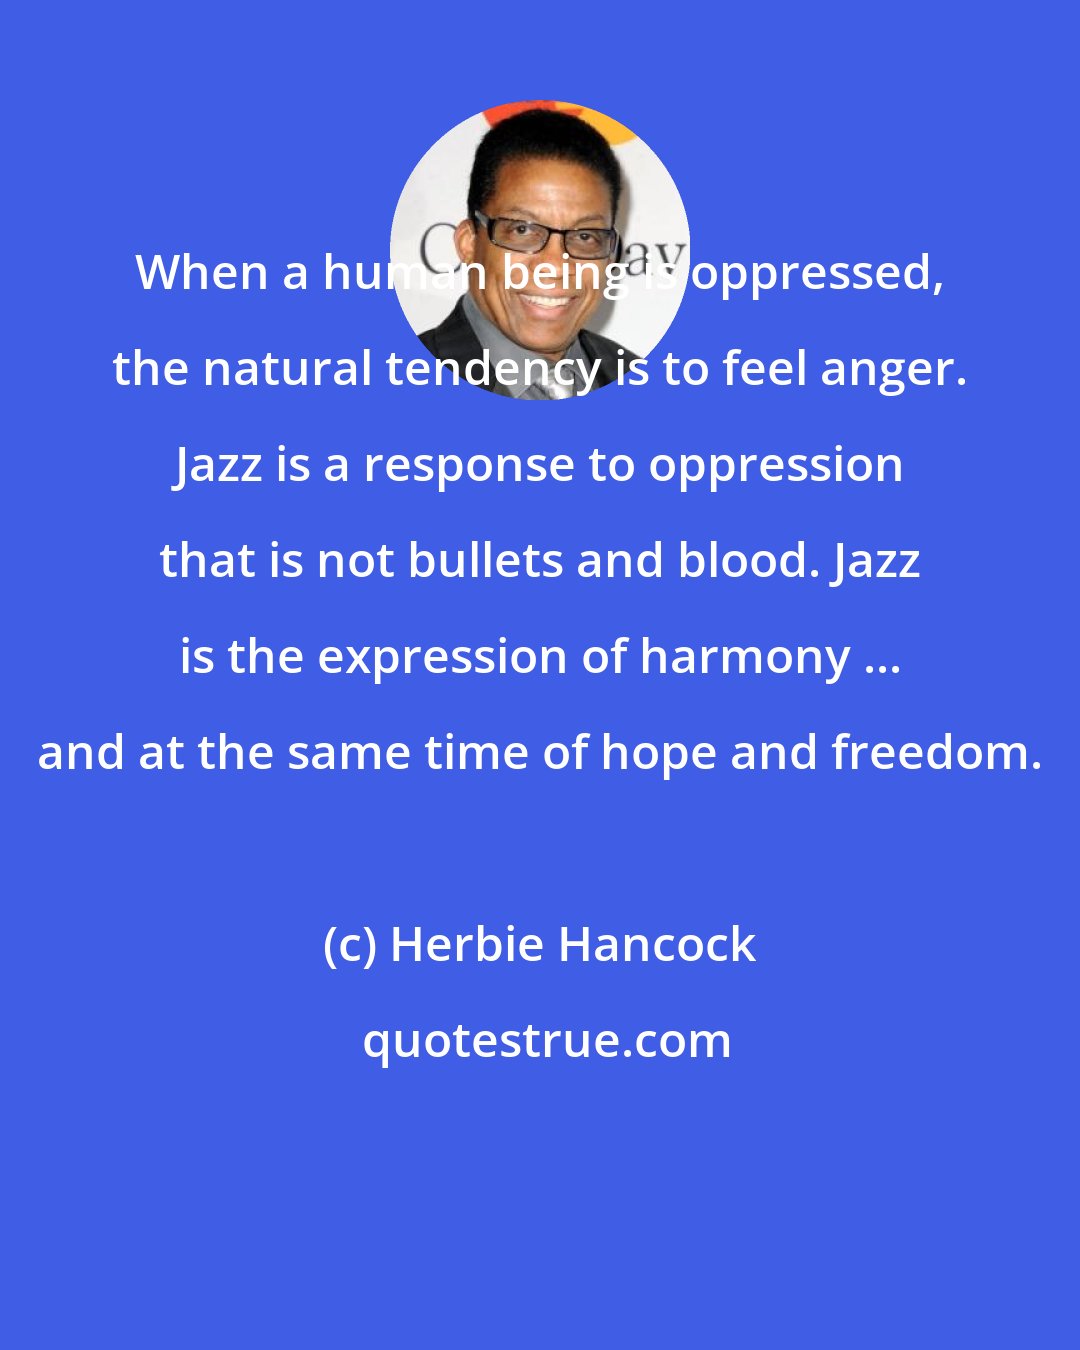 Herbie Hancock: When a human being is oppressed, the natural tendency is to feel anger. Jazz is a response to oppression that is not bullets and blood. Jazz is the expression of harmony ... and at the same time of hope and freedom.